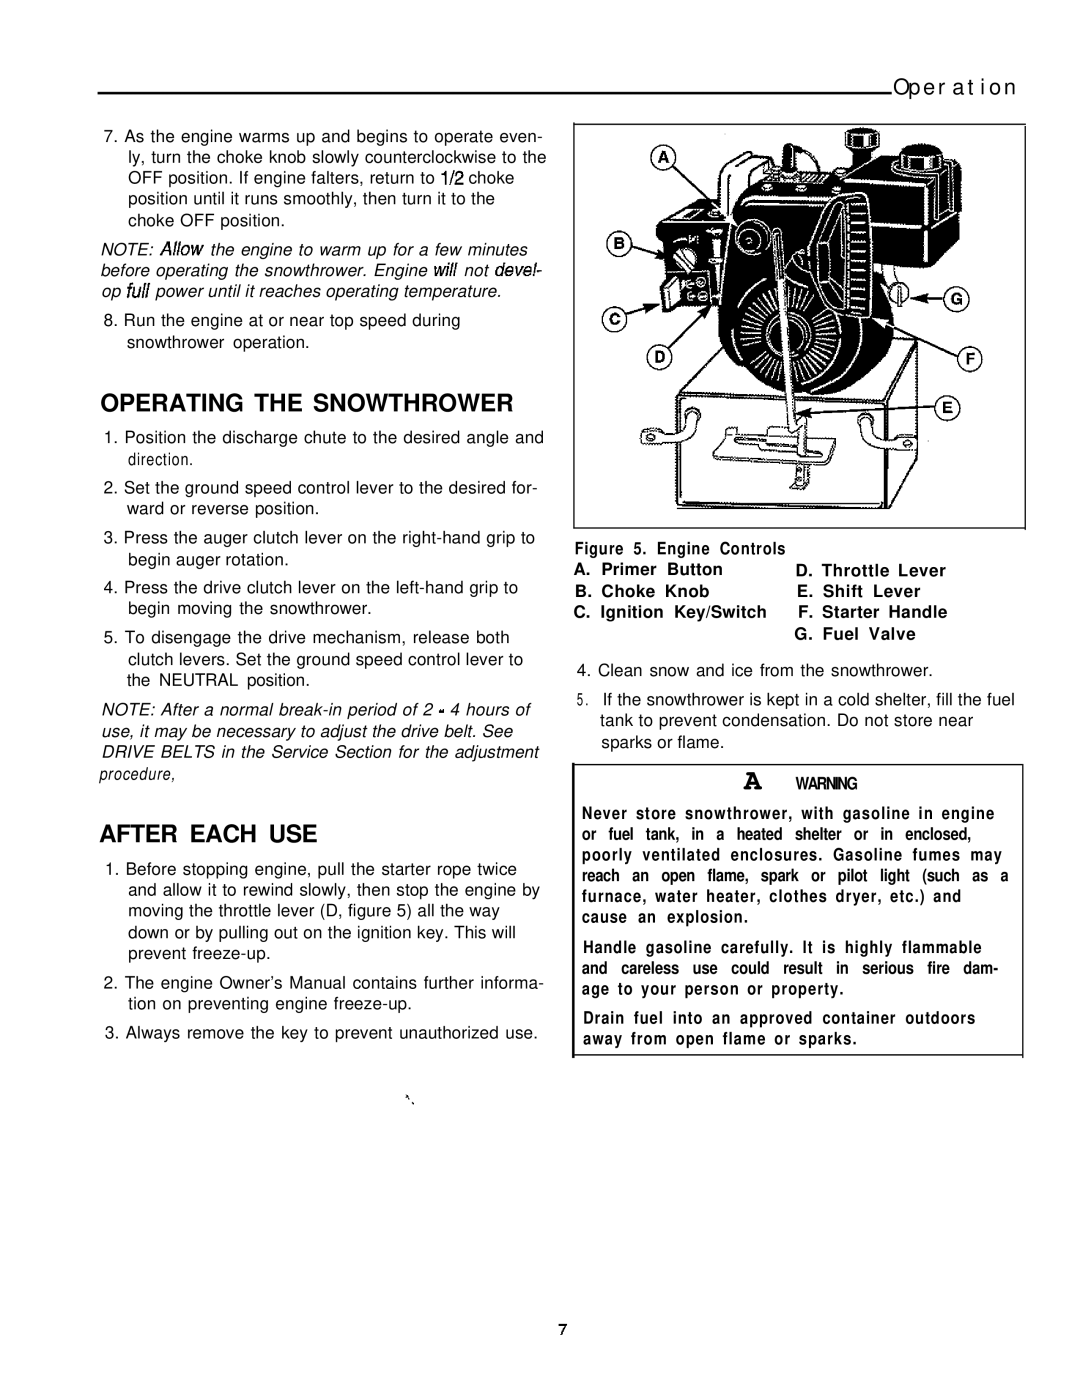 Simplicity 1691411, 7/22E manual Operating the Snowthrower, After Each USE, Or fuel tank, in a heated shelter or in enclosed 